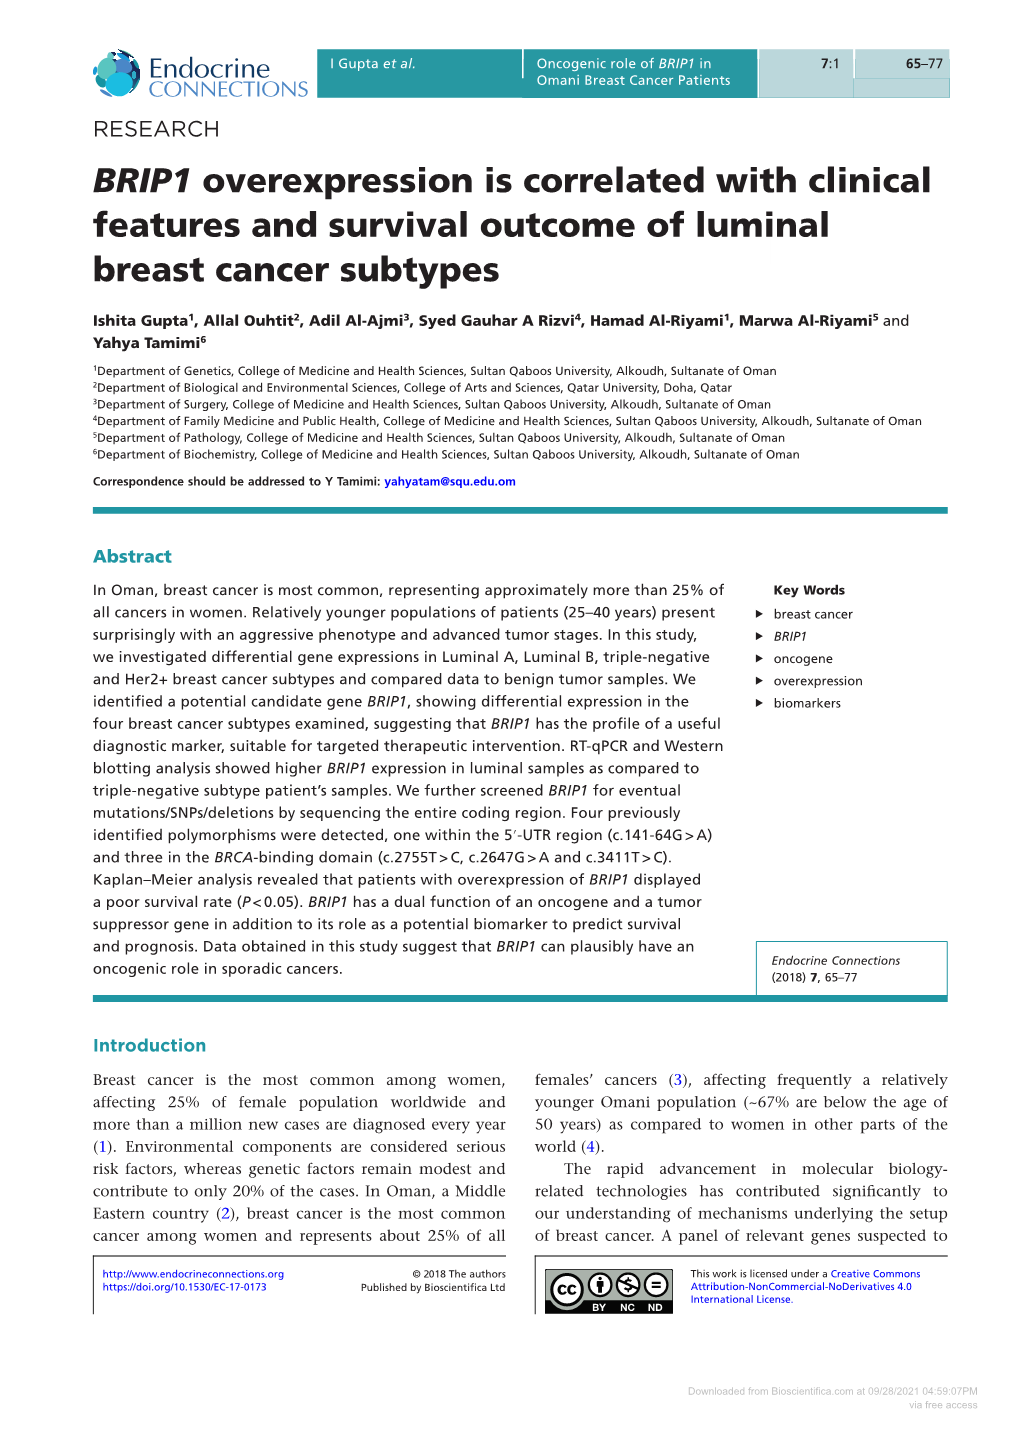 BRIP1 Overexpression Is Correlated with Clinical Features and Survival Outcome of Luminal Breast Cancer Subtypes